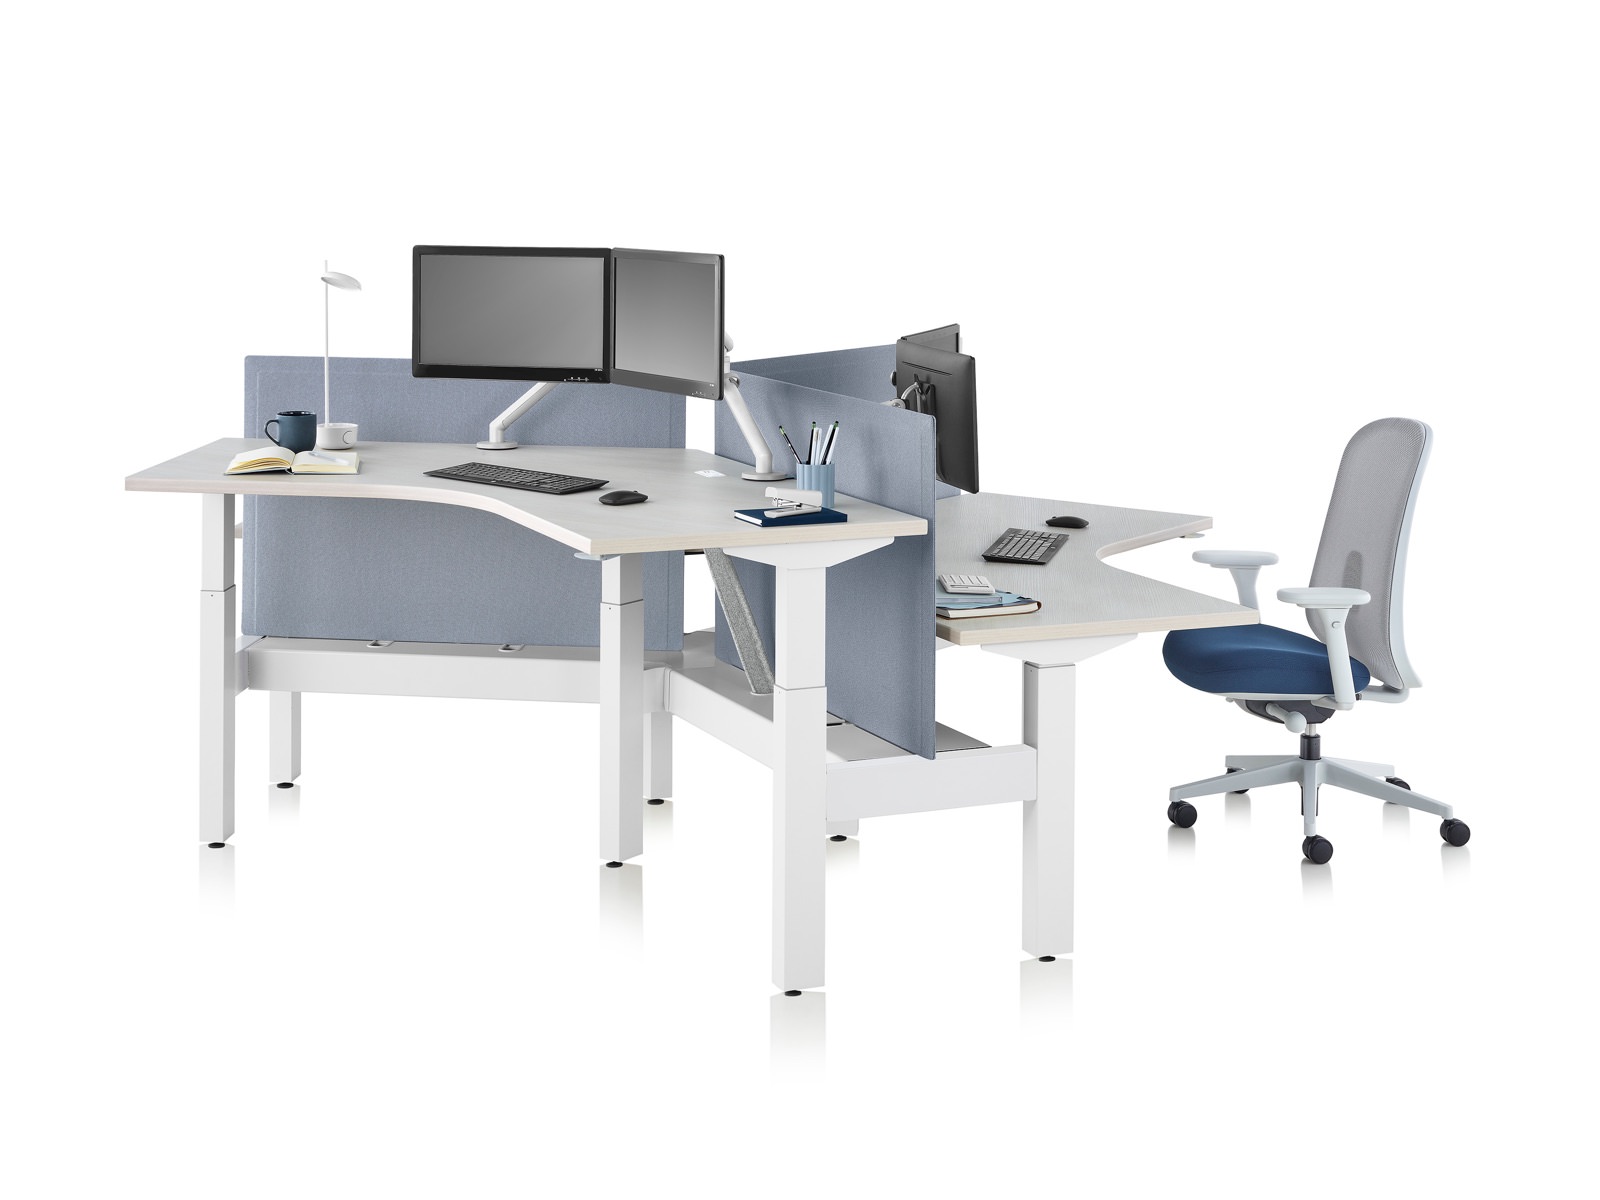 Standing desk system, Nevi Link, with 120-degree work surfaces, Lino Chairs, and screens. One of the three desks is raised at a standing height.